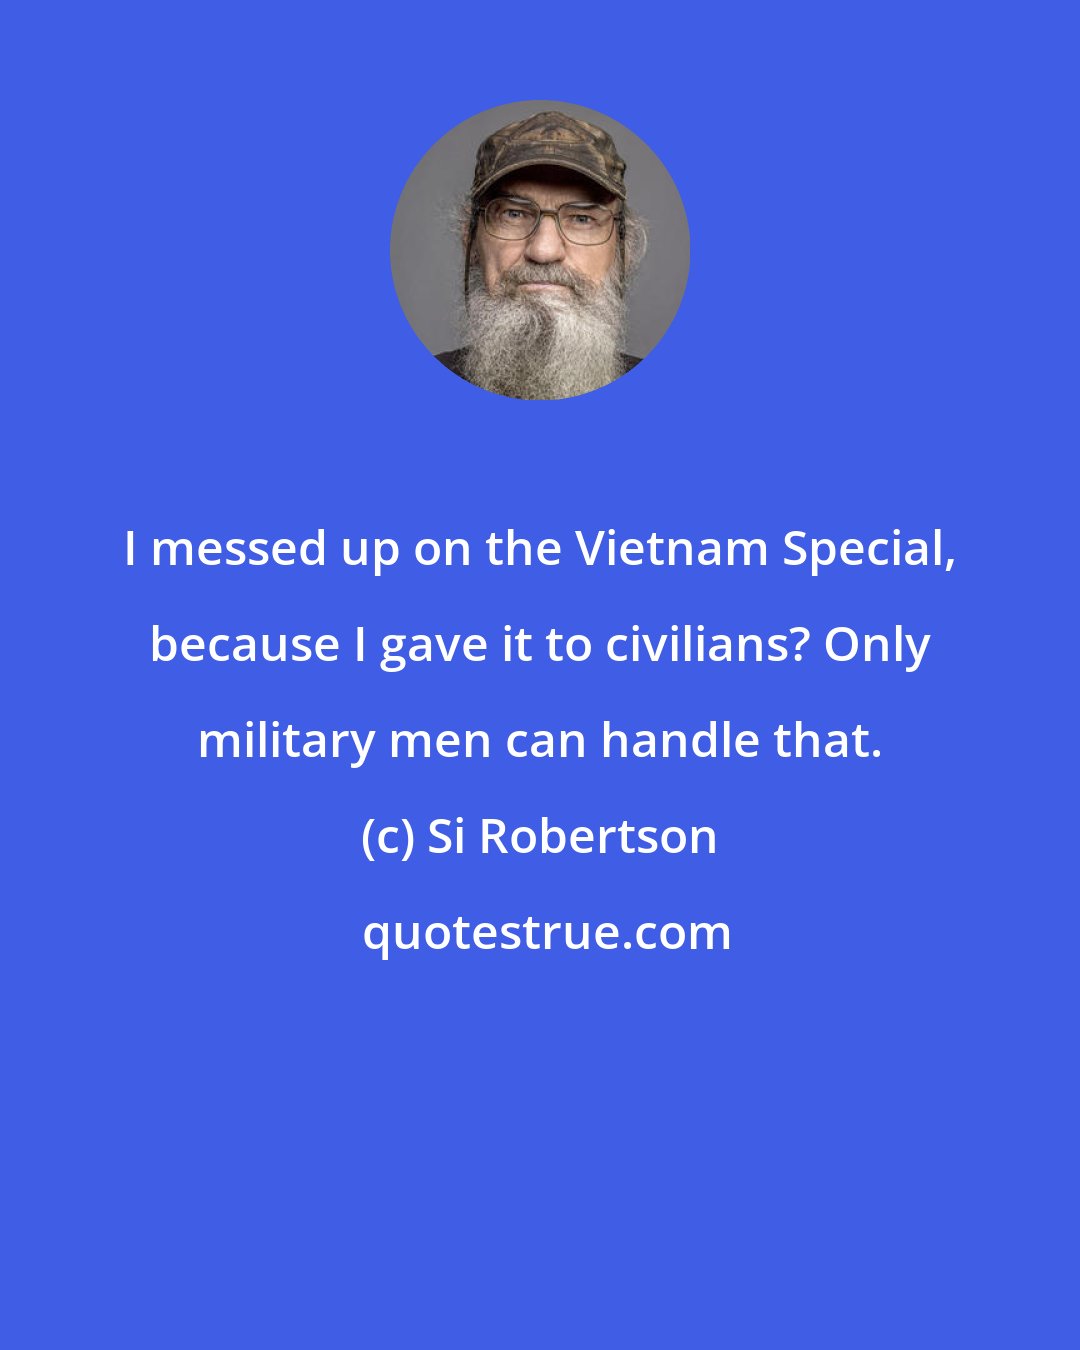 Si Robertson: I messed up on the Vietnam Special, because I gave it to civilians? Only military men can handle that.